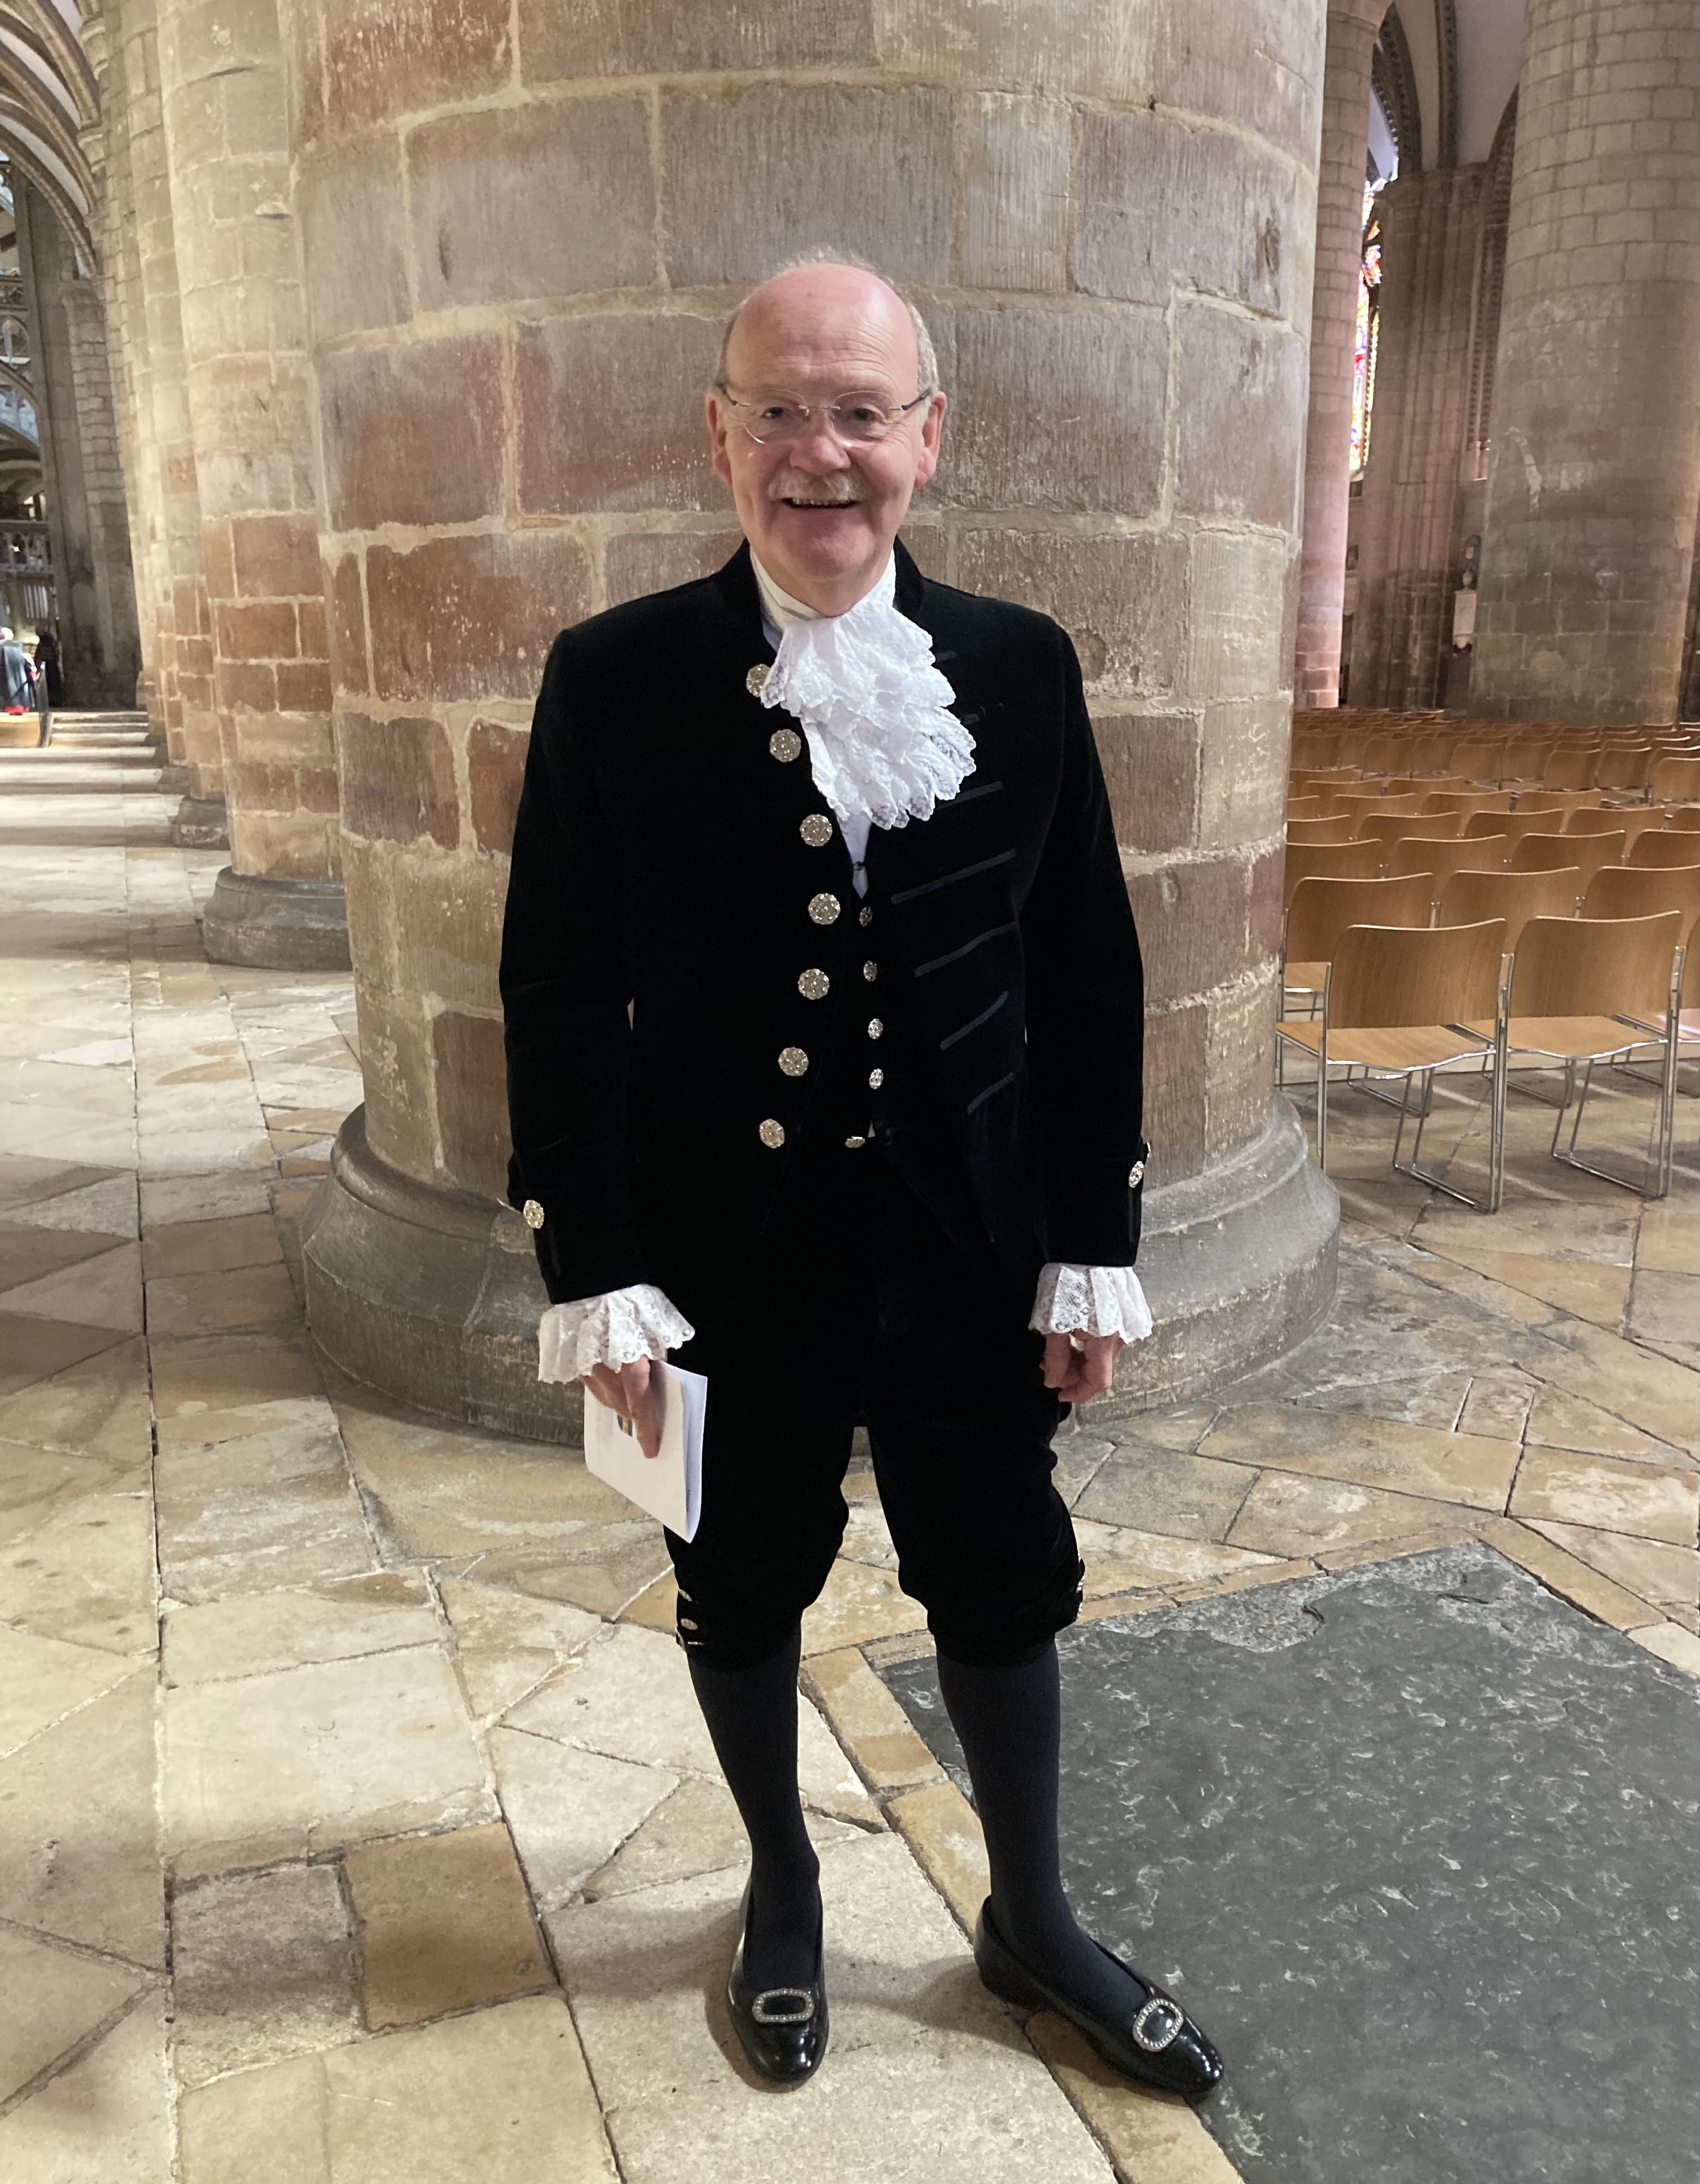 The High Sheriff of Gloucestershire